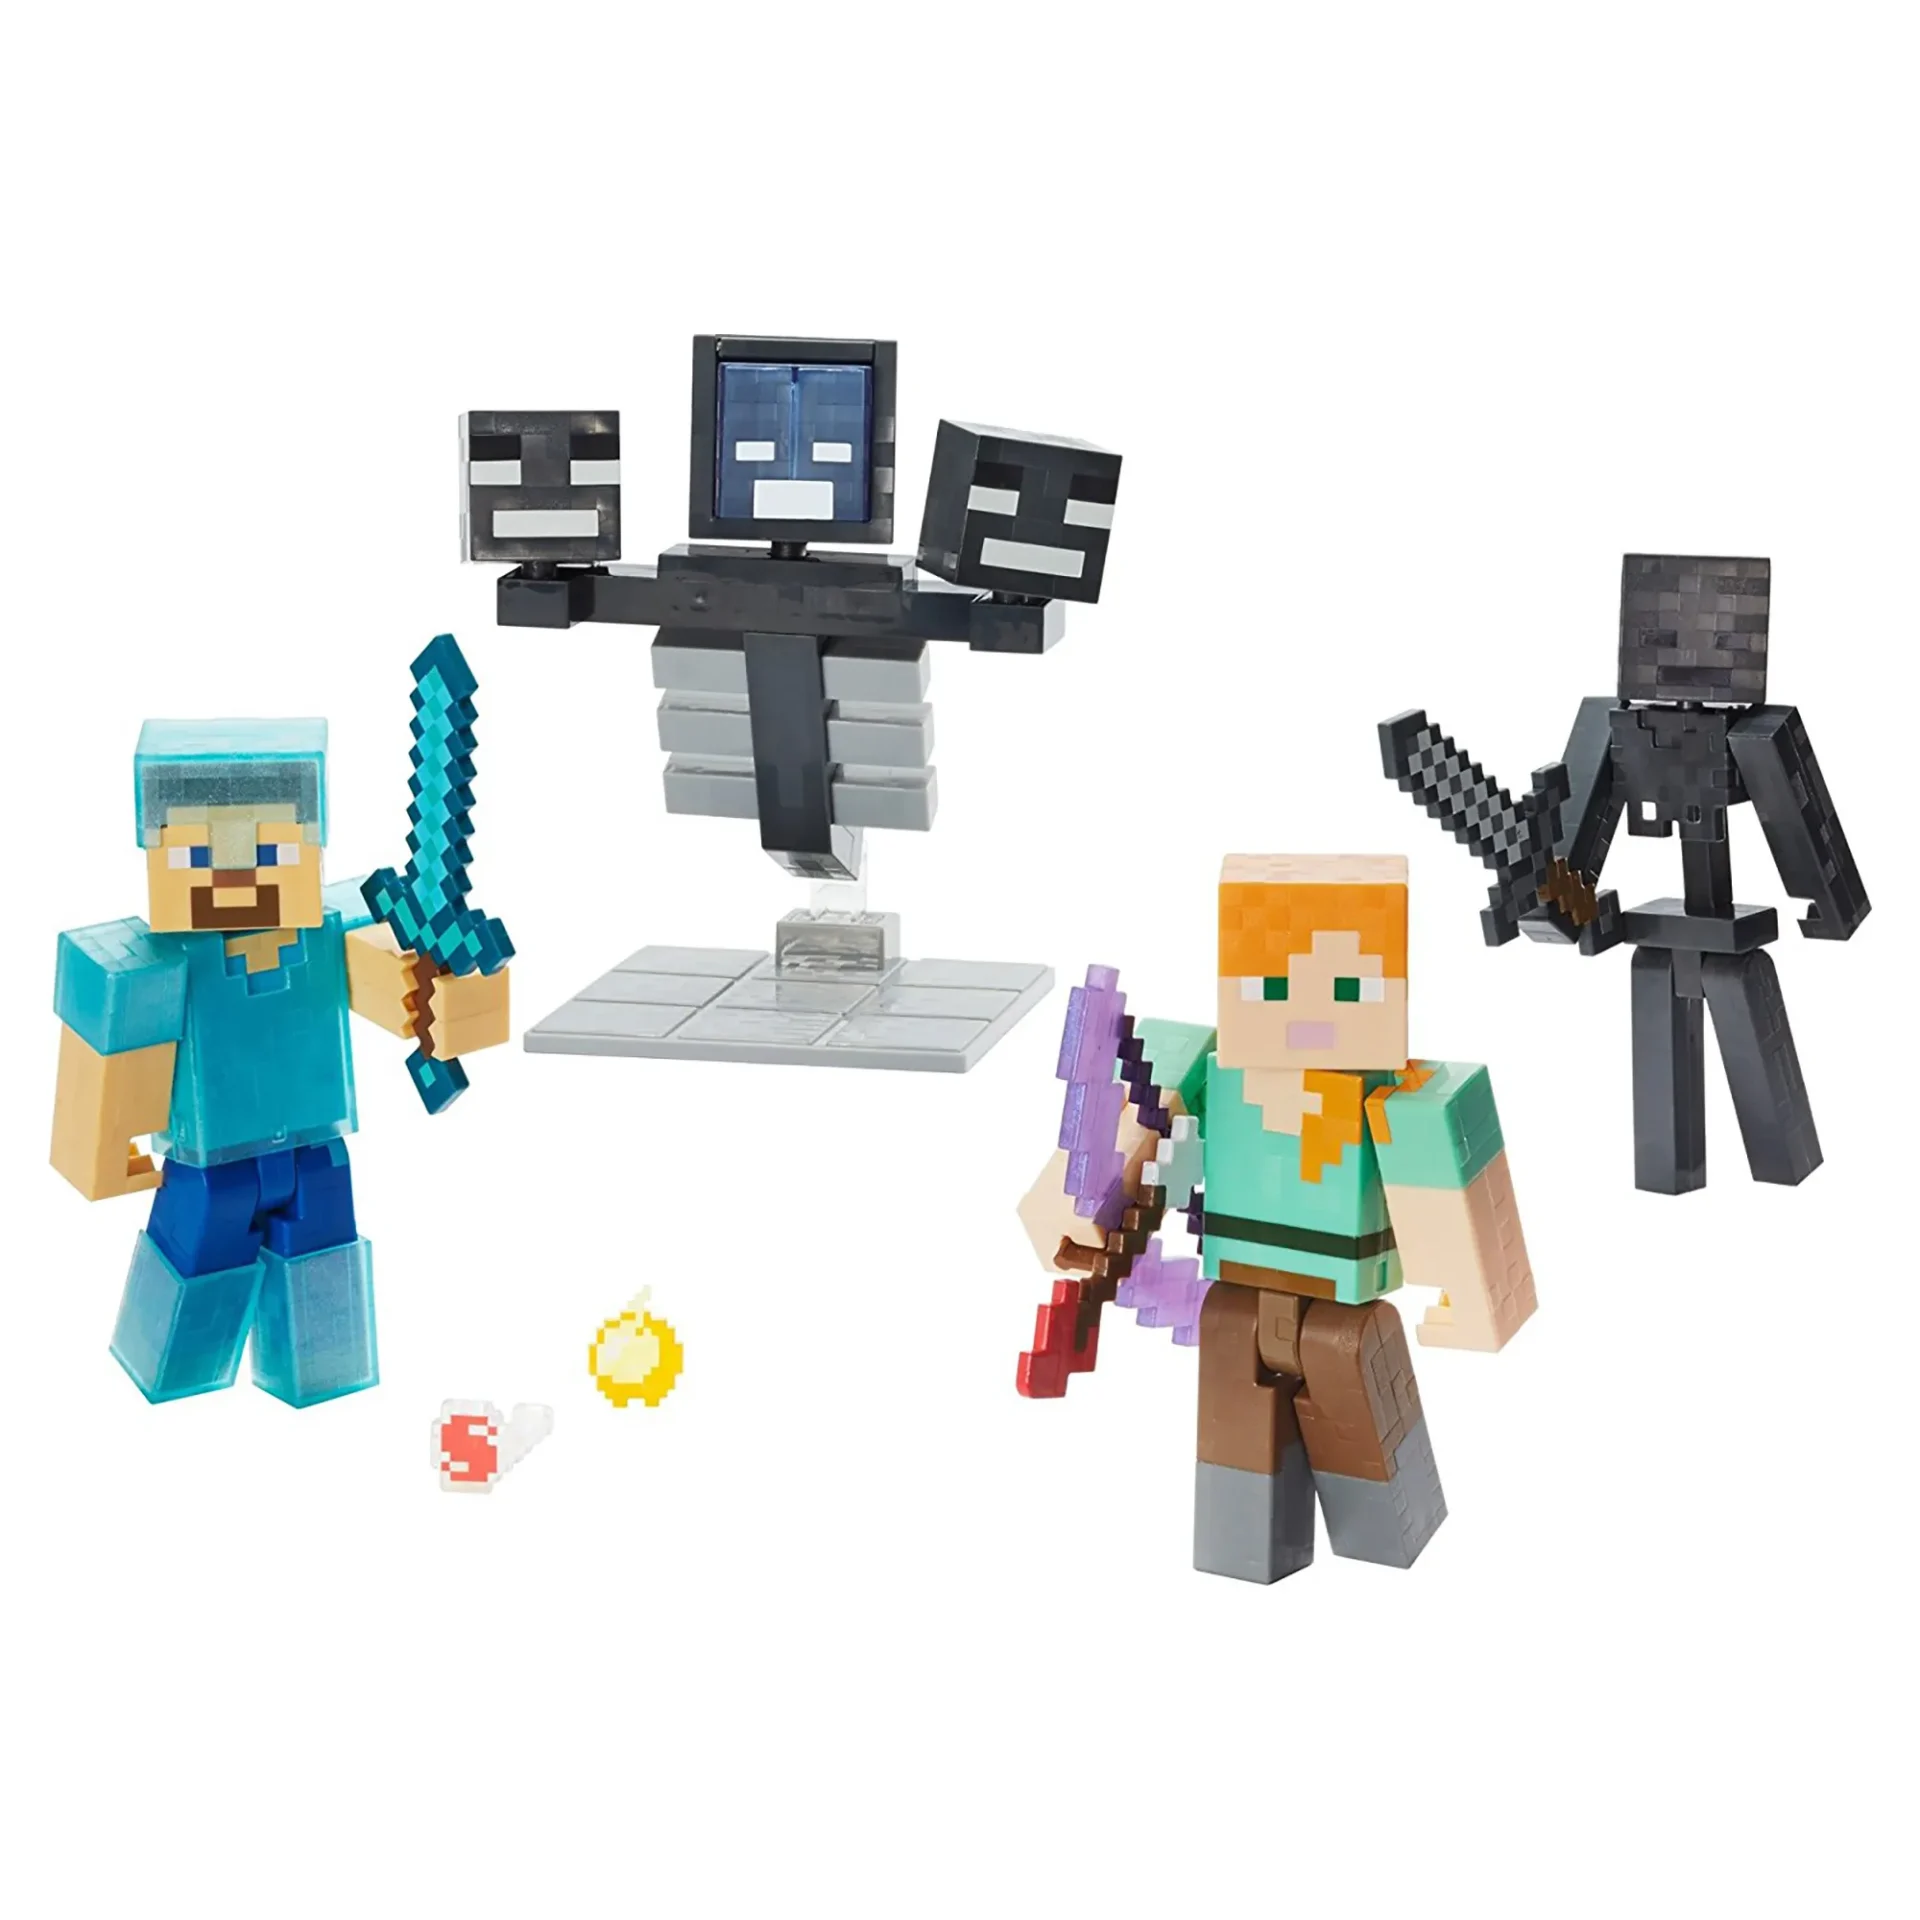 A set of minecraft figures with a sword and a sword.